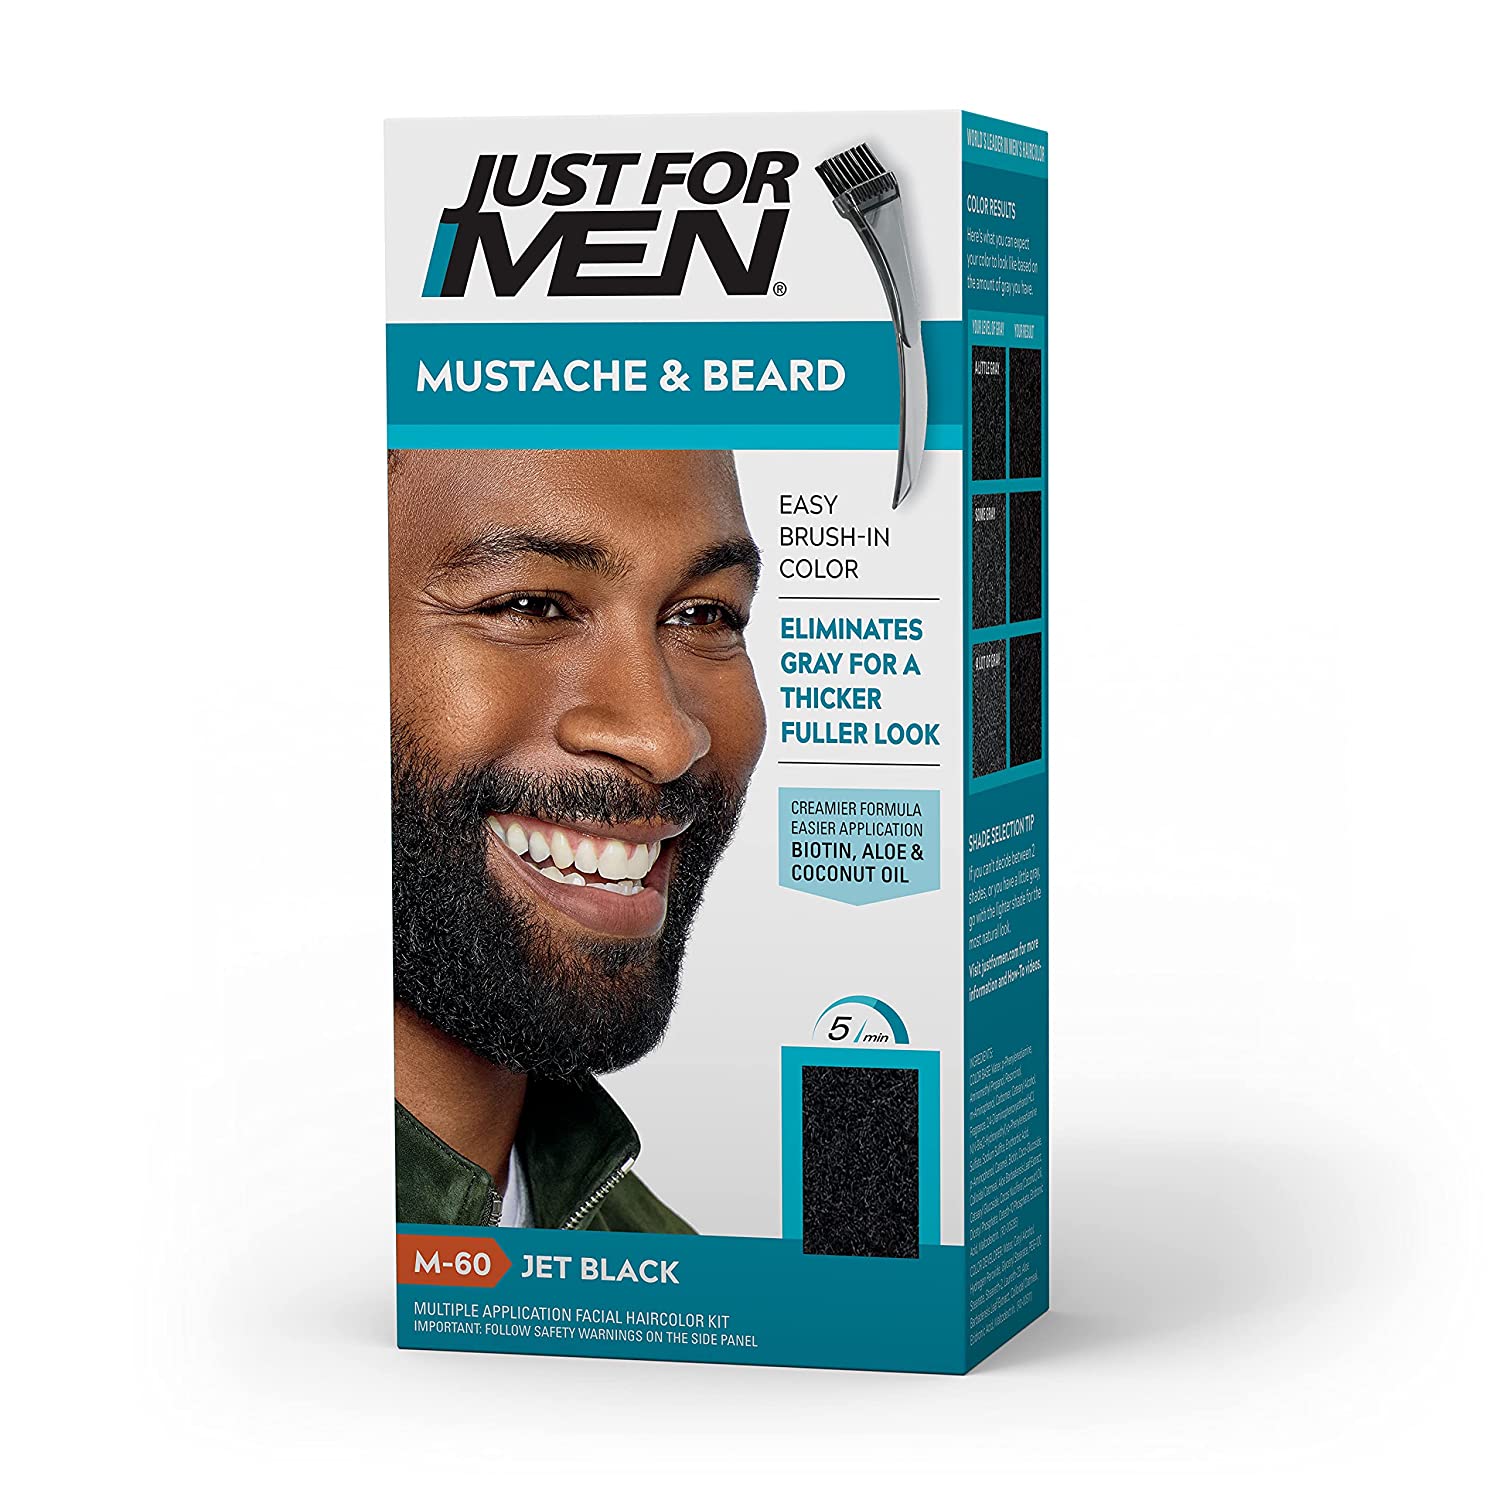 Just For Men Mustache & Beard, Beard Coloring for Gray Hair with Brush Included